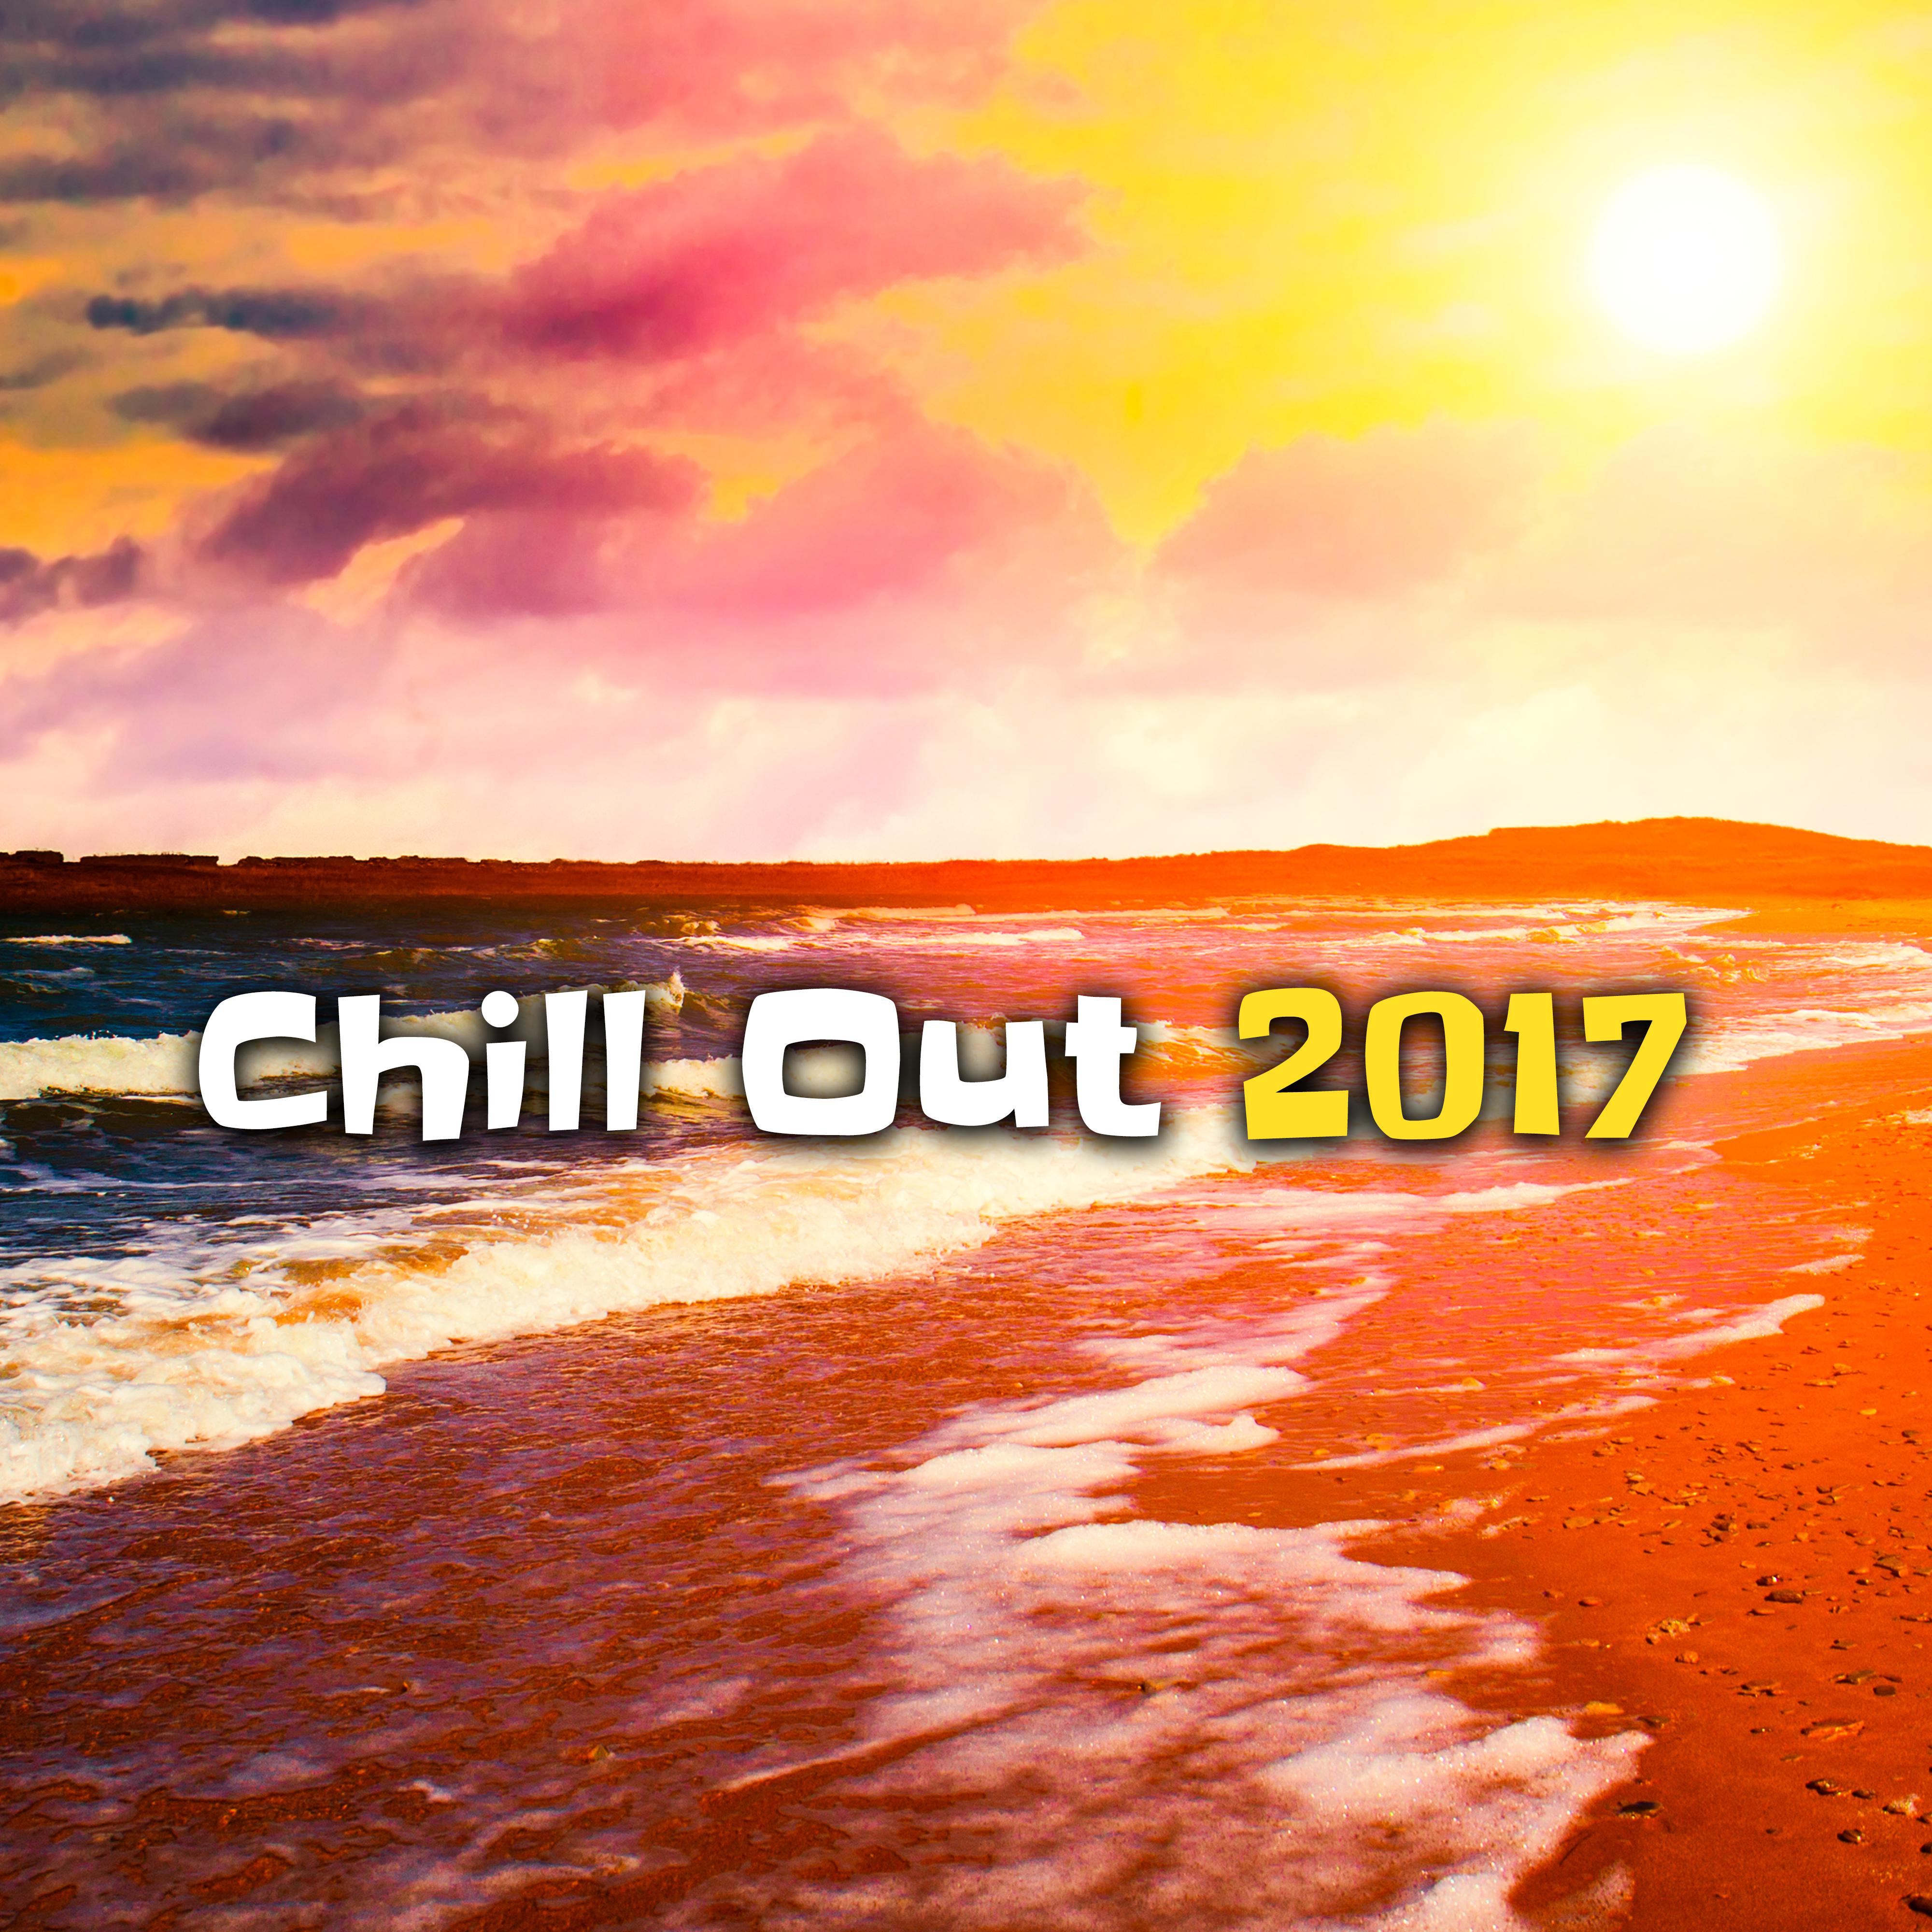 Chill Out 2017 – Relaxing Music After Work, Chill Out Mix, Ambient Music, Relax, Deep Chill Out Vibes, Cafe Chillout